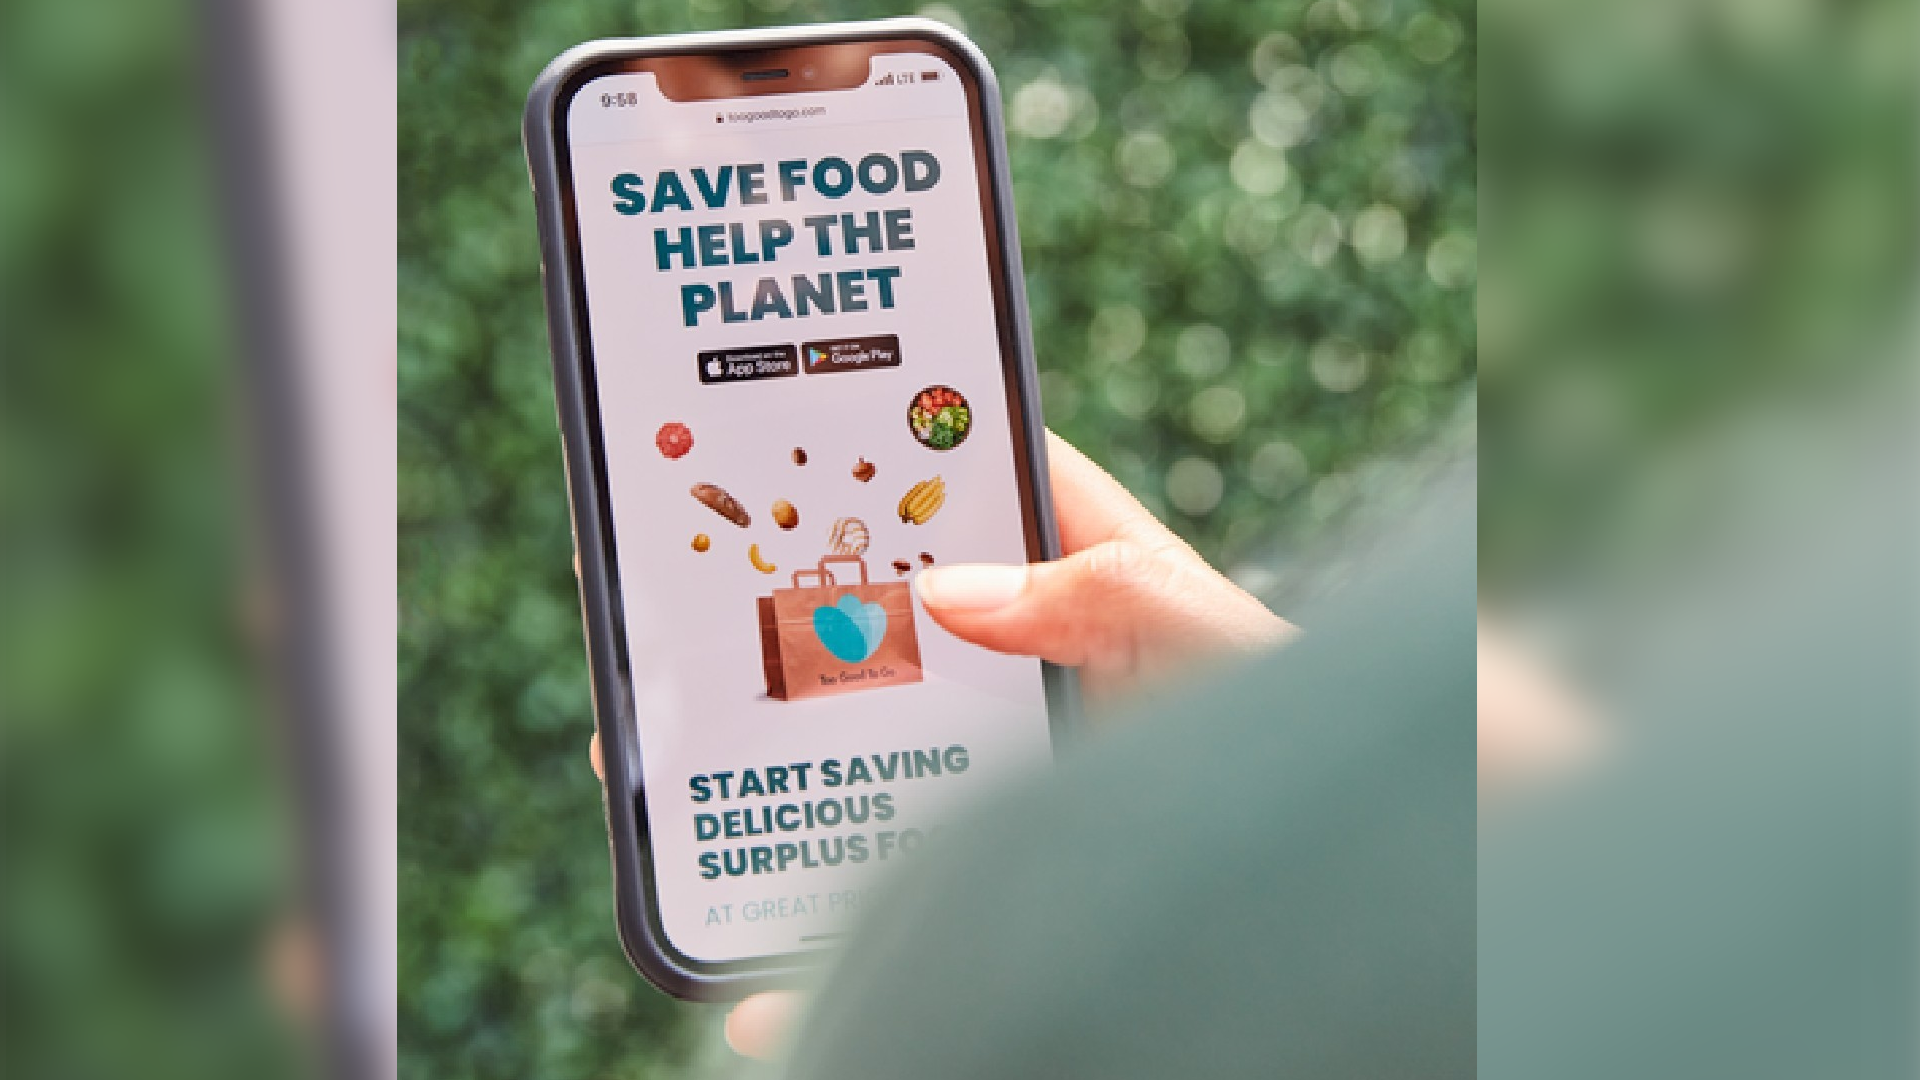 Review: Too Good To Go, the App That Offers Food Deals to Cut Down on Waste  - Eater